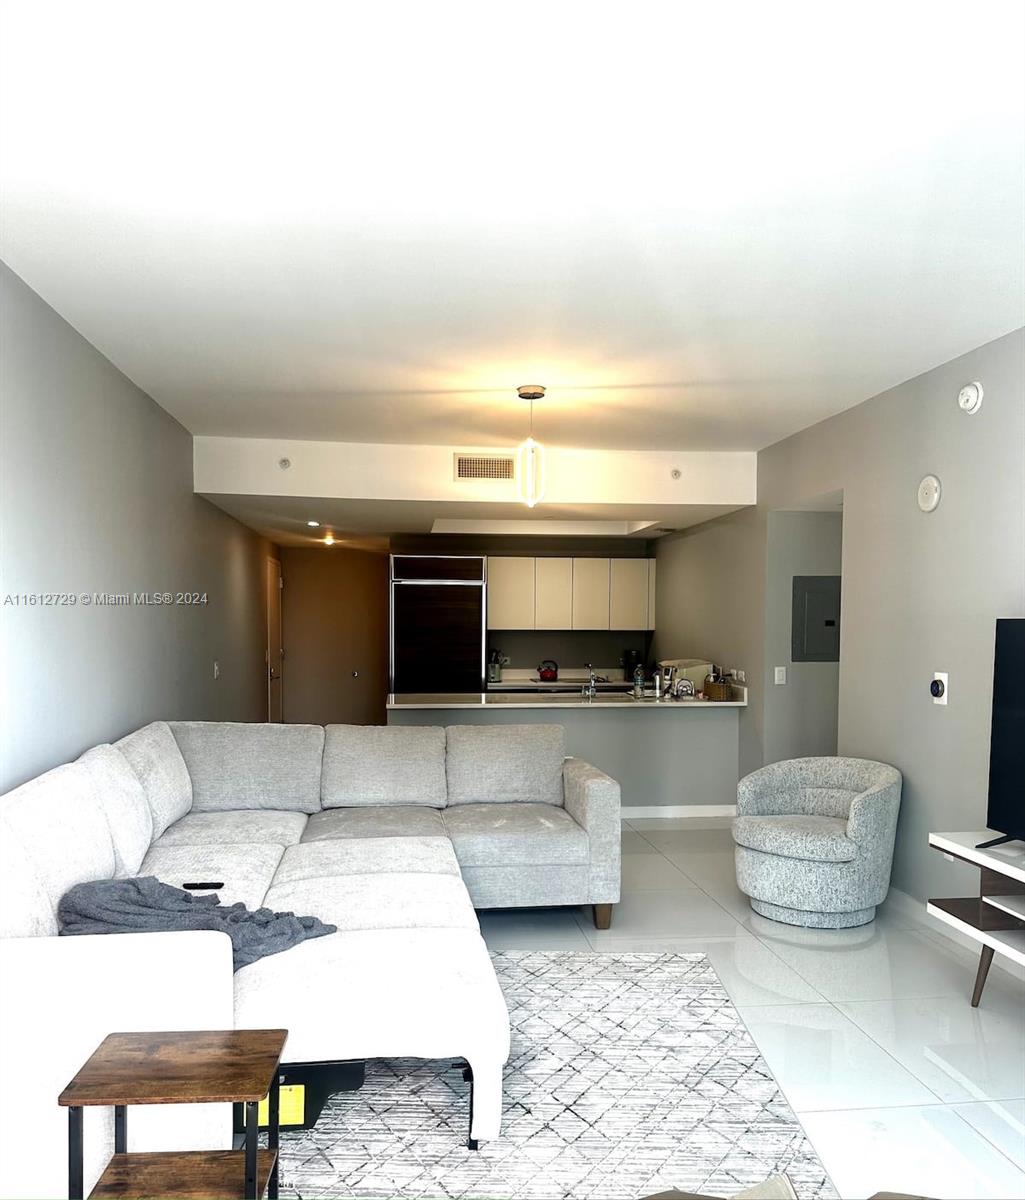 3 months or less*. MOVING INTO THIS BEAUTIFUL, MODERN & TURNKEY FURNISHED 2 BEDROOMS/ 2 B UNIT AT MILLECENTO WILL BE A BREEZE! THIS APARTMENT HAS CHIC AND COLORFUL FURNITURE TOUCHES ALONG WITH LARGE AND BRIGHT PORCELAIN FLOORS INSIDE AND OUT! SOME OF THE ADDITIONS INCLUDE SHADES AND BLACKOUTS AND A NEST SYSTEM! ITS LARGE BALCONY OVERLOOKS THE ENTIRE MARY BRICKELL VILLAGE AND HAS SUPERB SUNSET VIEWS YOU DO NOT WANT TO MISS! IT ALSO COMES WITH AN ASSIGNED PARKING SPACE! The building is located in the heart of Brickell, steps from all restaurants, shops and entertainment venues of Mary Brickell Village and Brickell City Centre. Steps away from the metro rail and 2 metro mover stations. Great amenities that include a rooftop pool, another pool on the 9th, a 24 hour gym, a theater, lounge, etc.